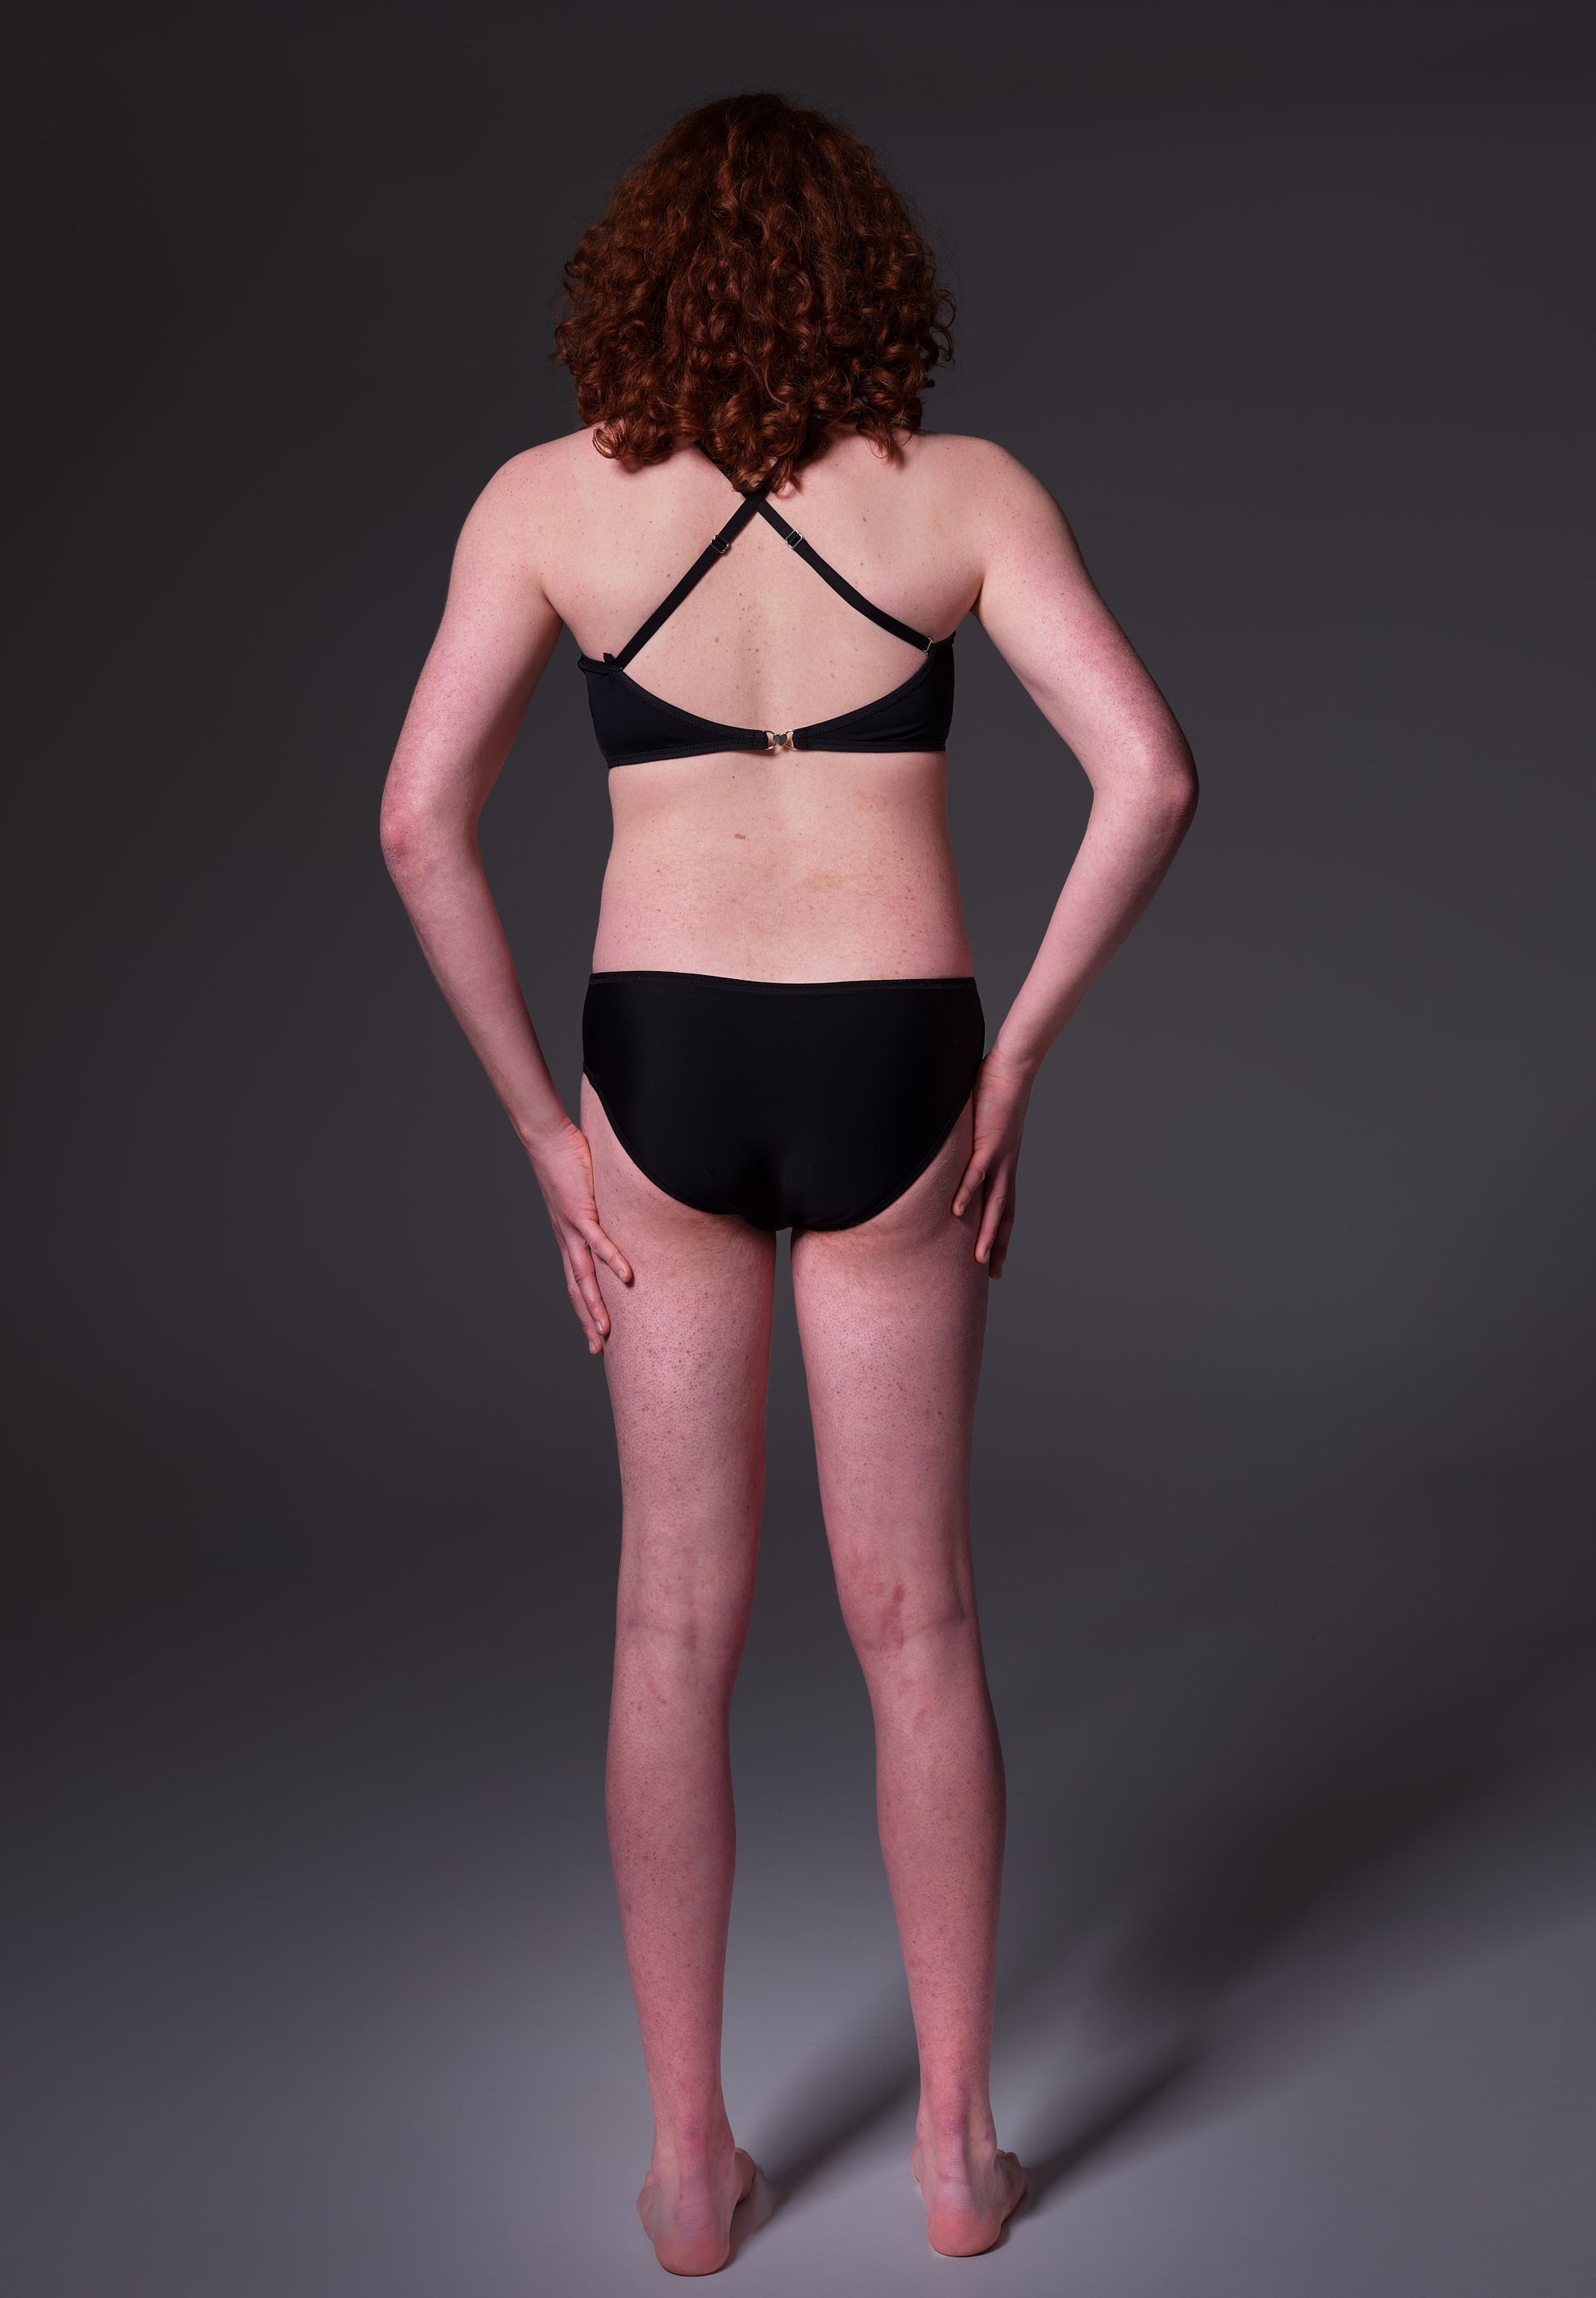 Back view of Sweder modelling the Slip extra strong black